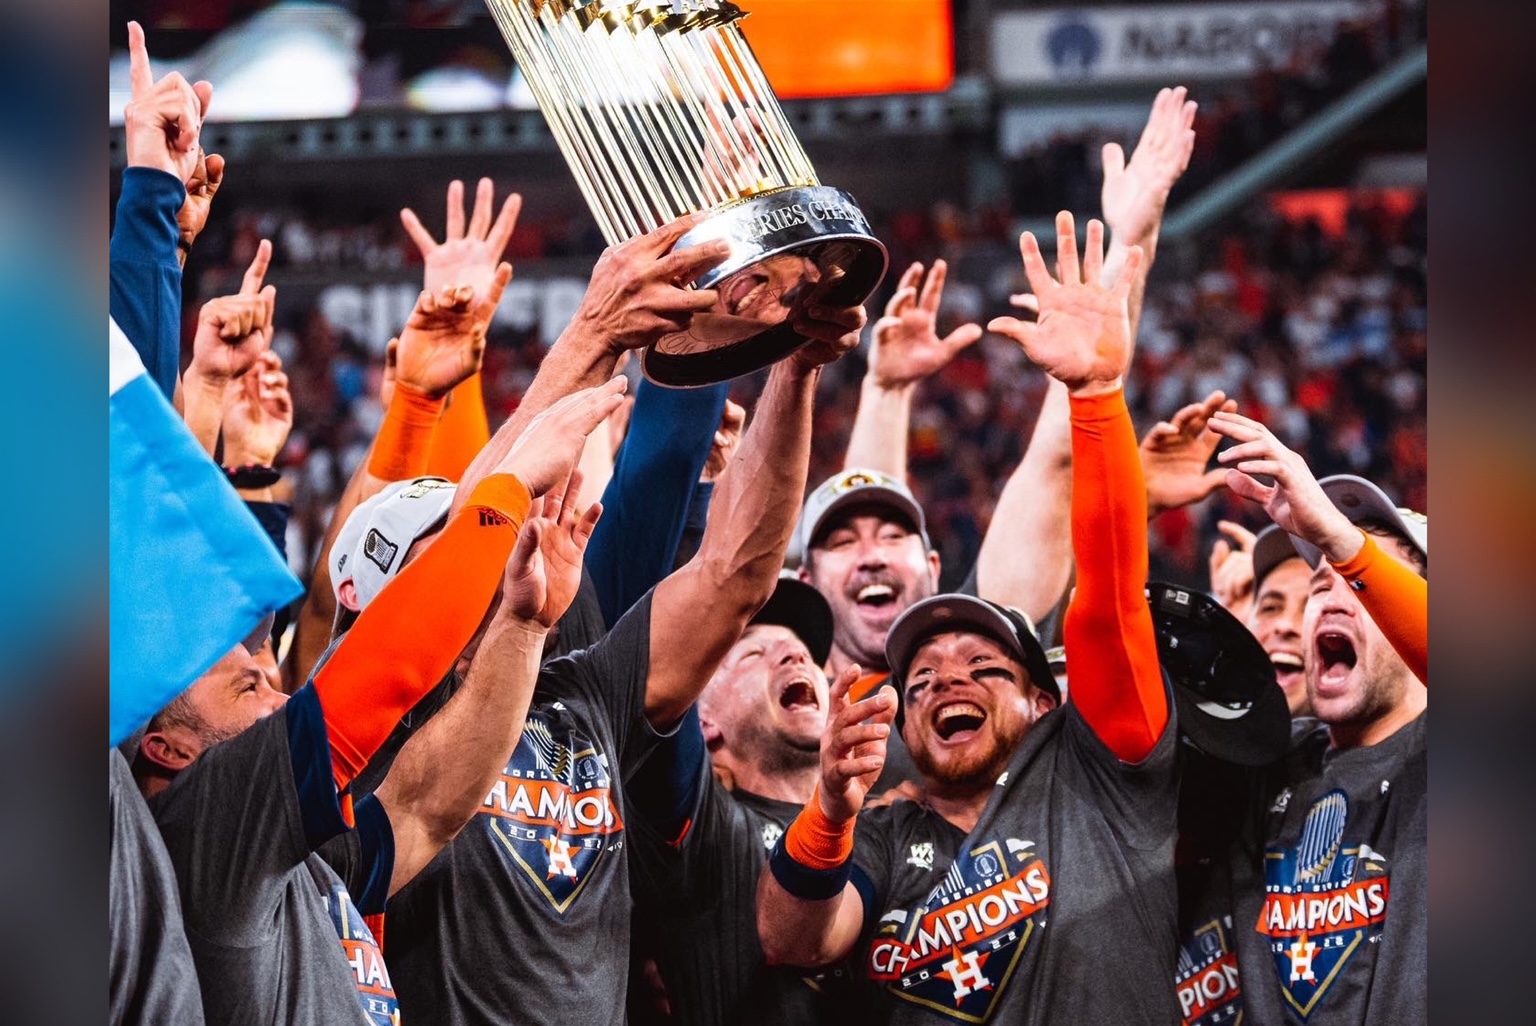 Houston ISD schools to close Monday for Astros victory parade